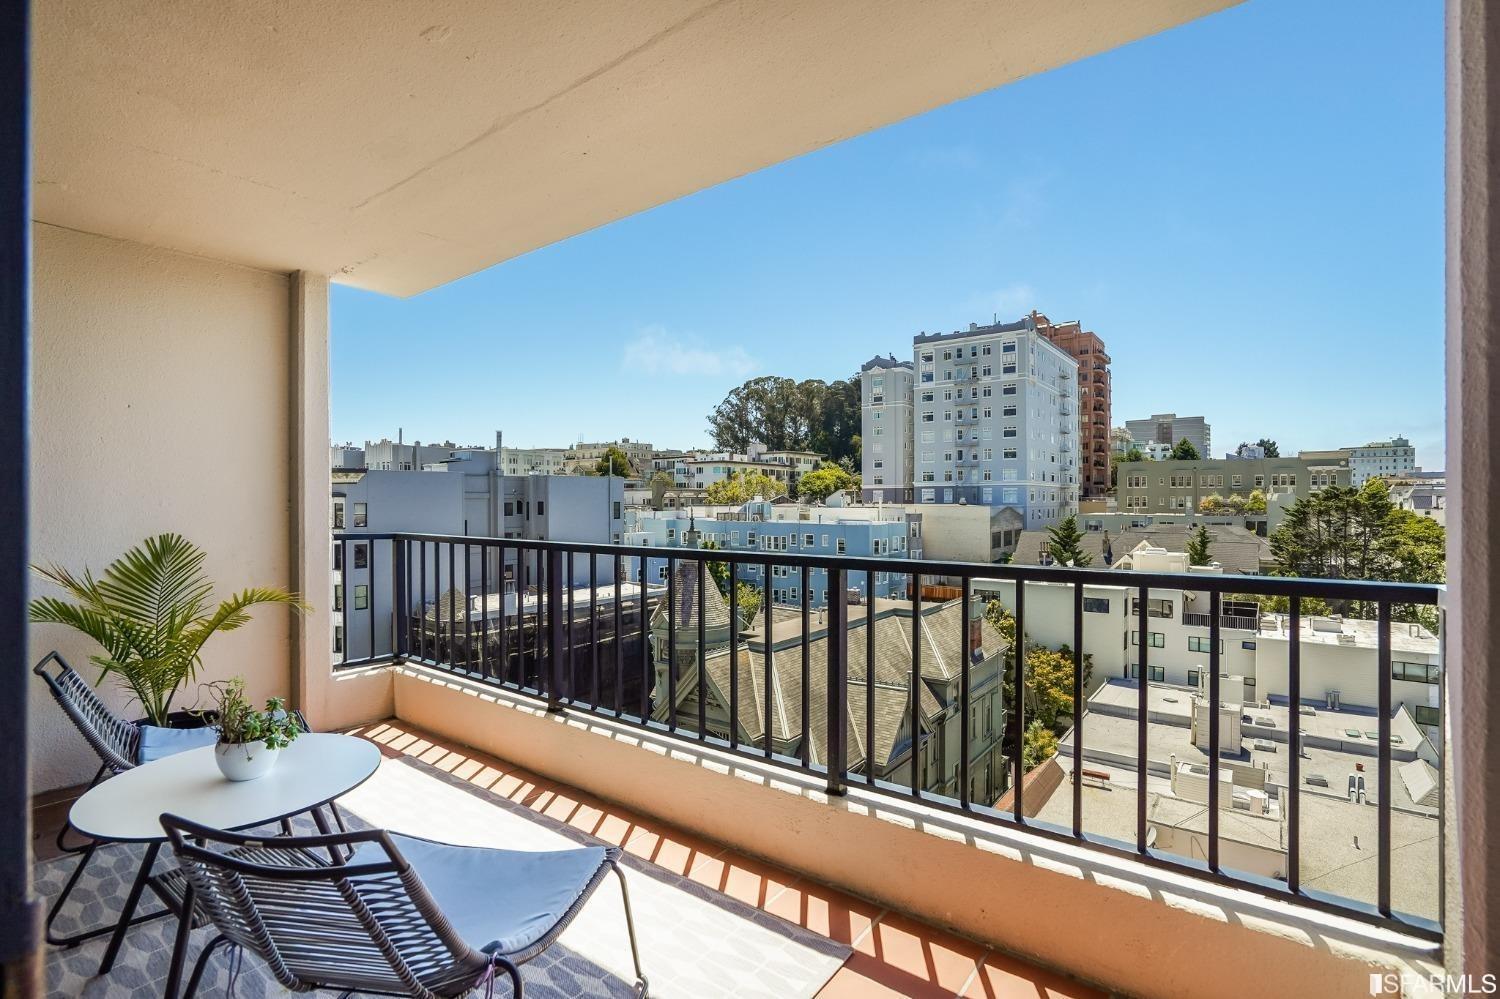 Private terrace with wonderful outlooks of surrounding buildings to Lafayette Park.